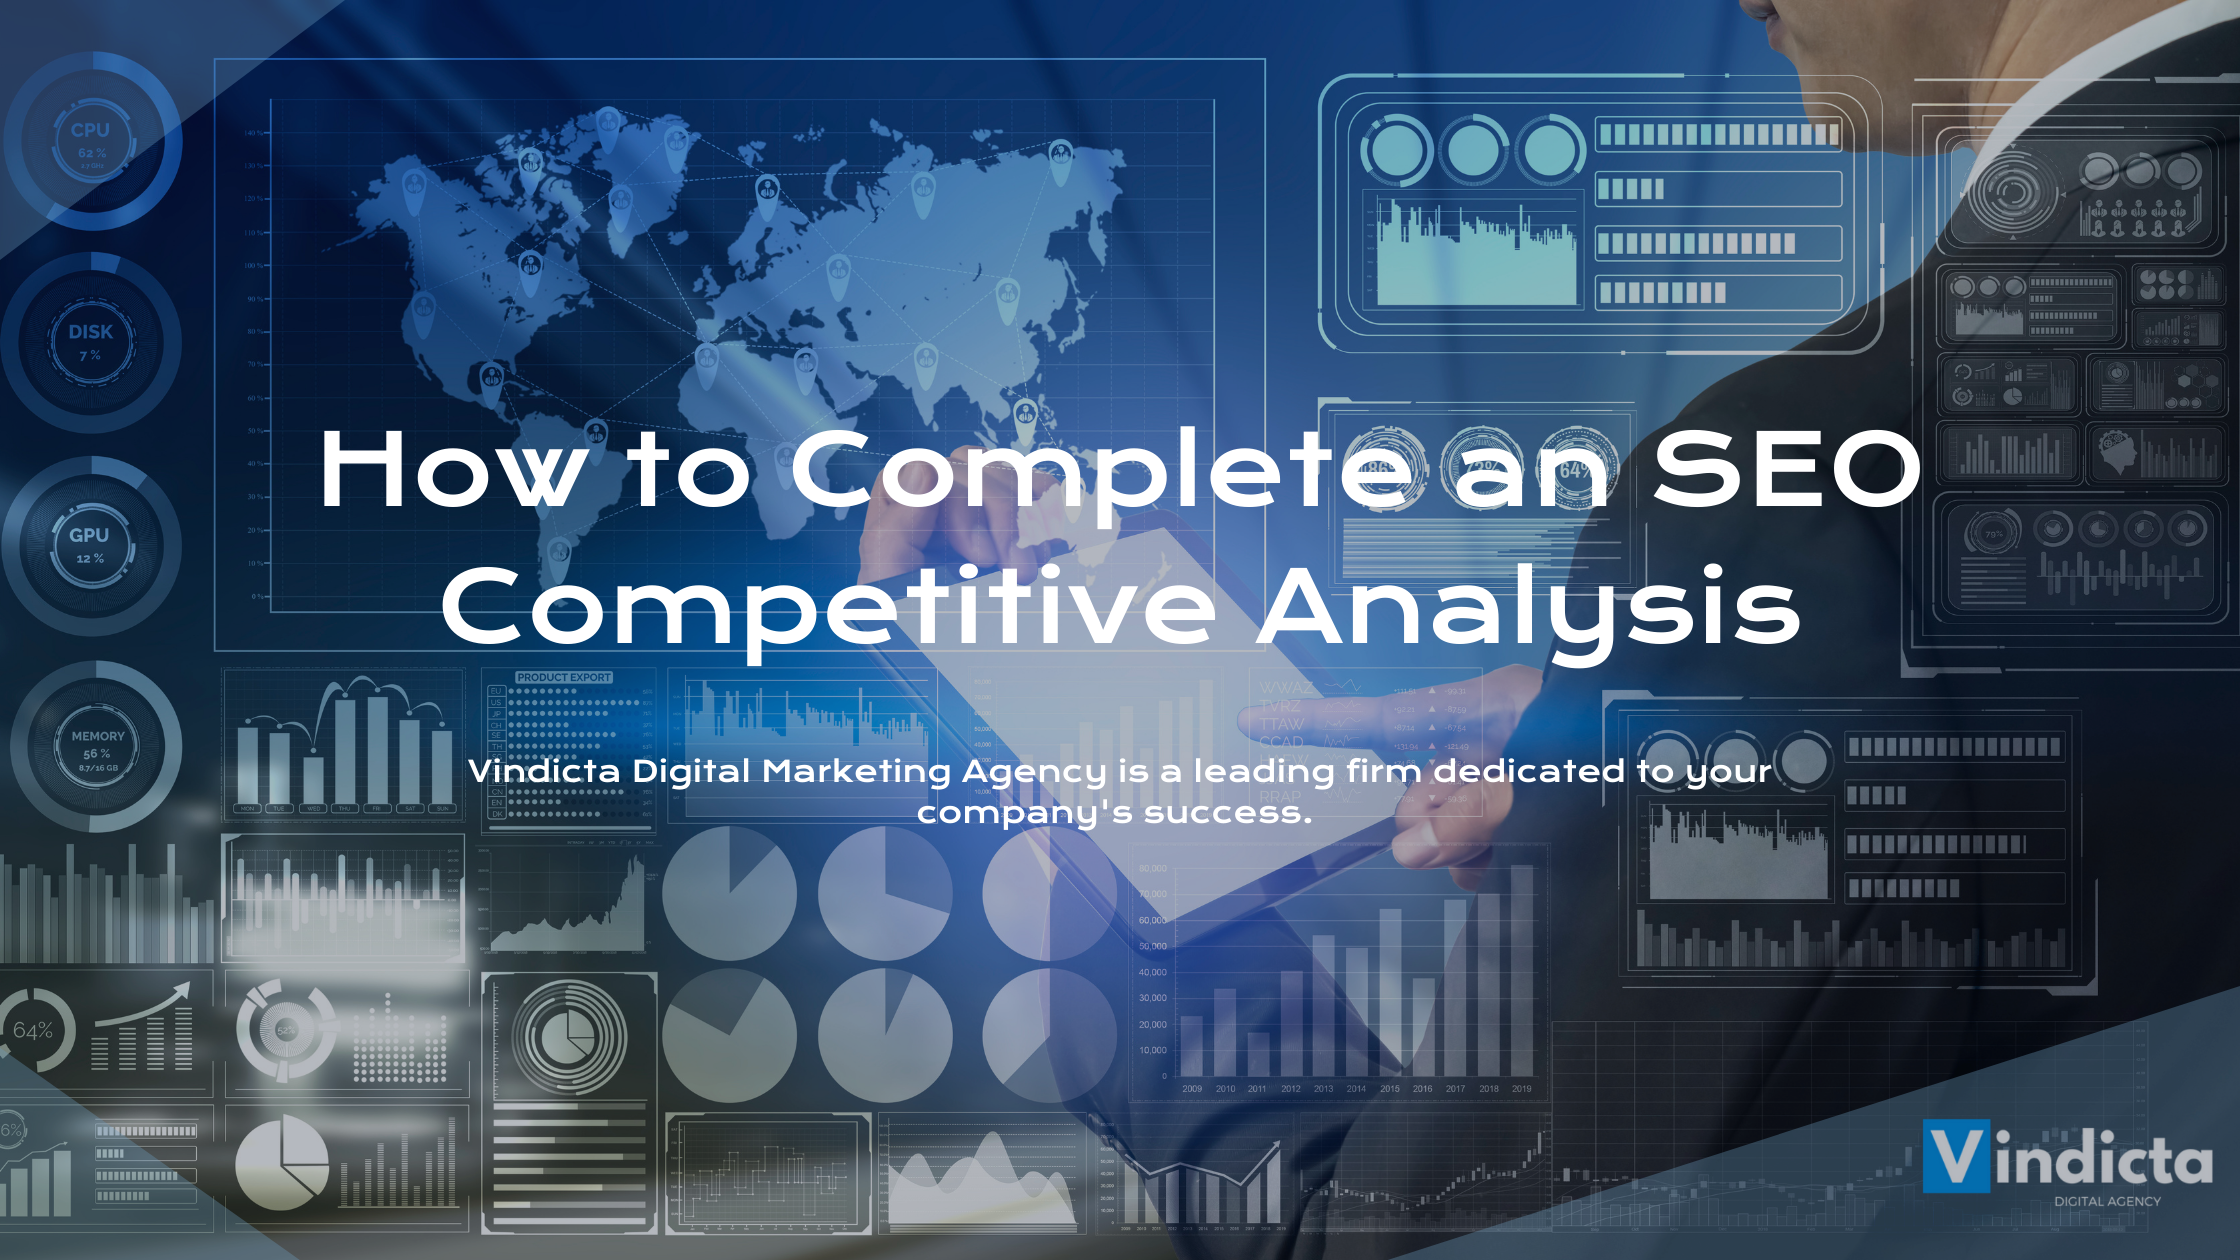 How to Complete an SEO Competitive Analysis